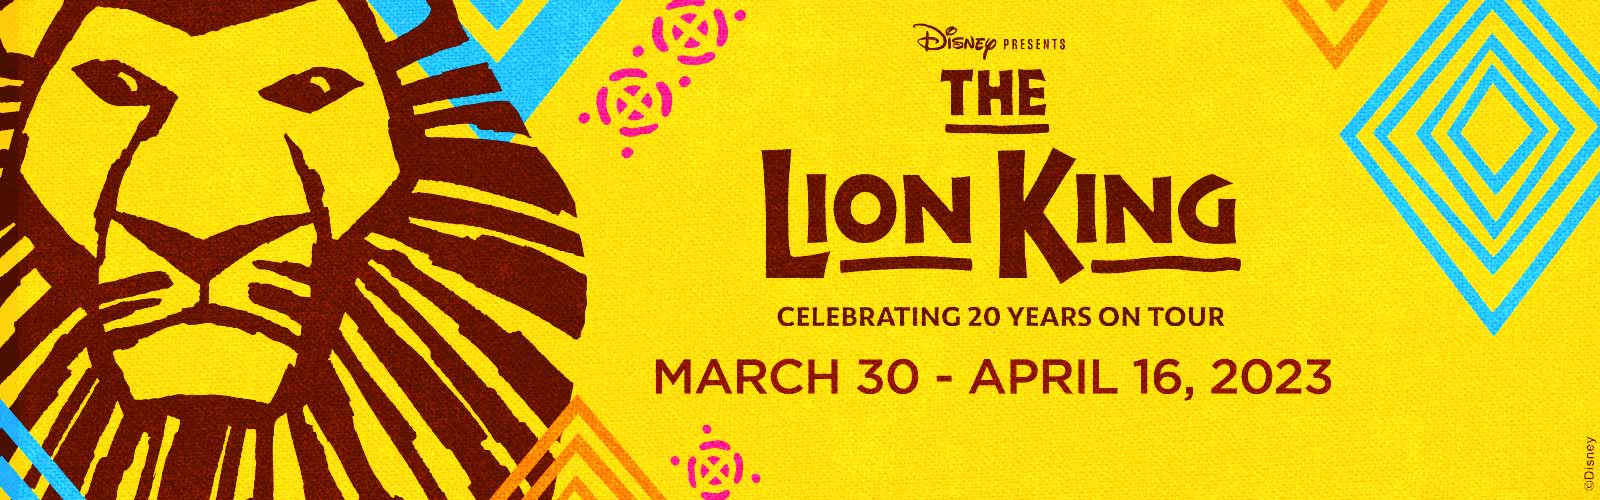 The Lion King on sale now!